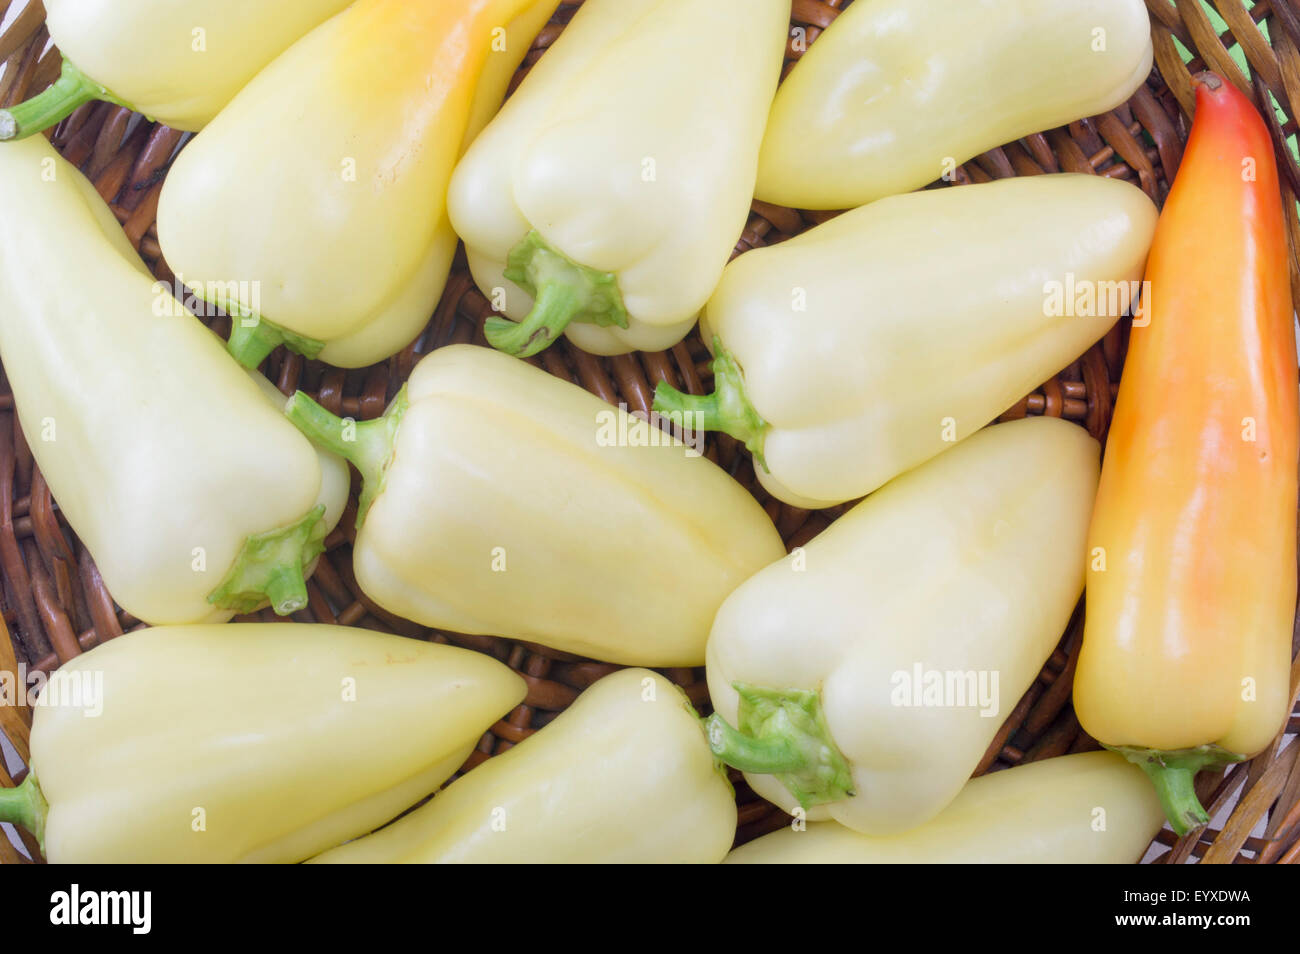 Natural green and orange chili peppers arranged on a wooden plate Stock Photo